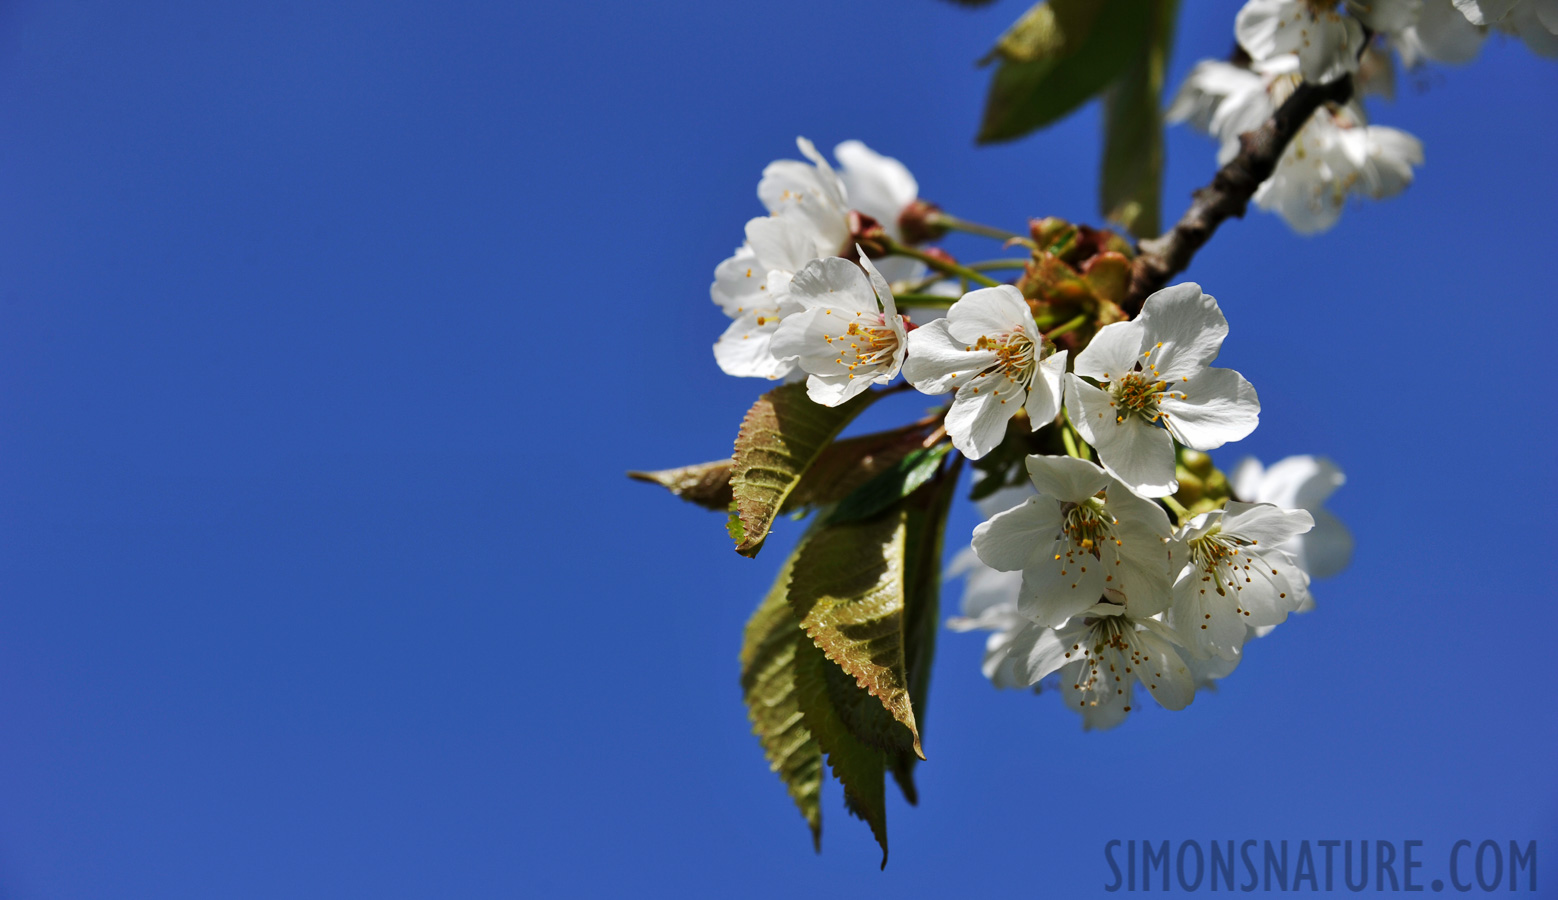 Cherry Blossoms [125 mm, 1/640 sec at f / 7.1, ISO 200]